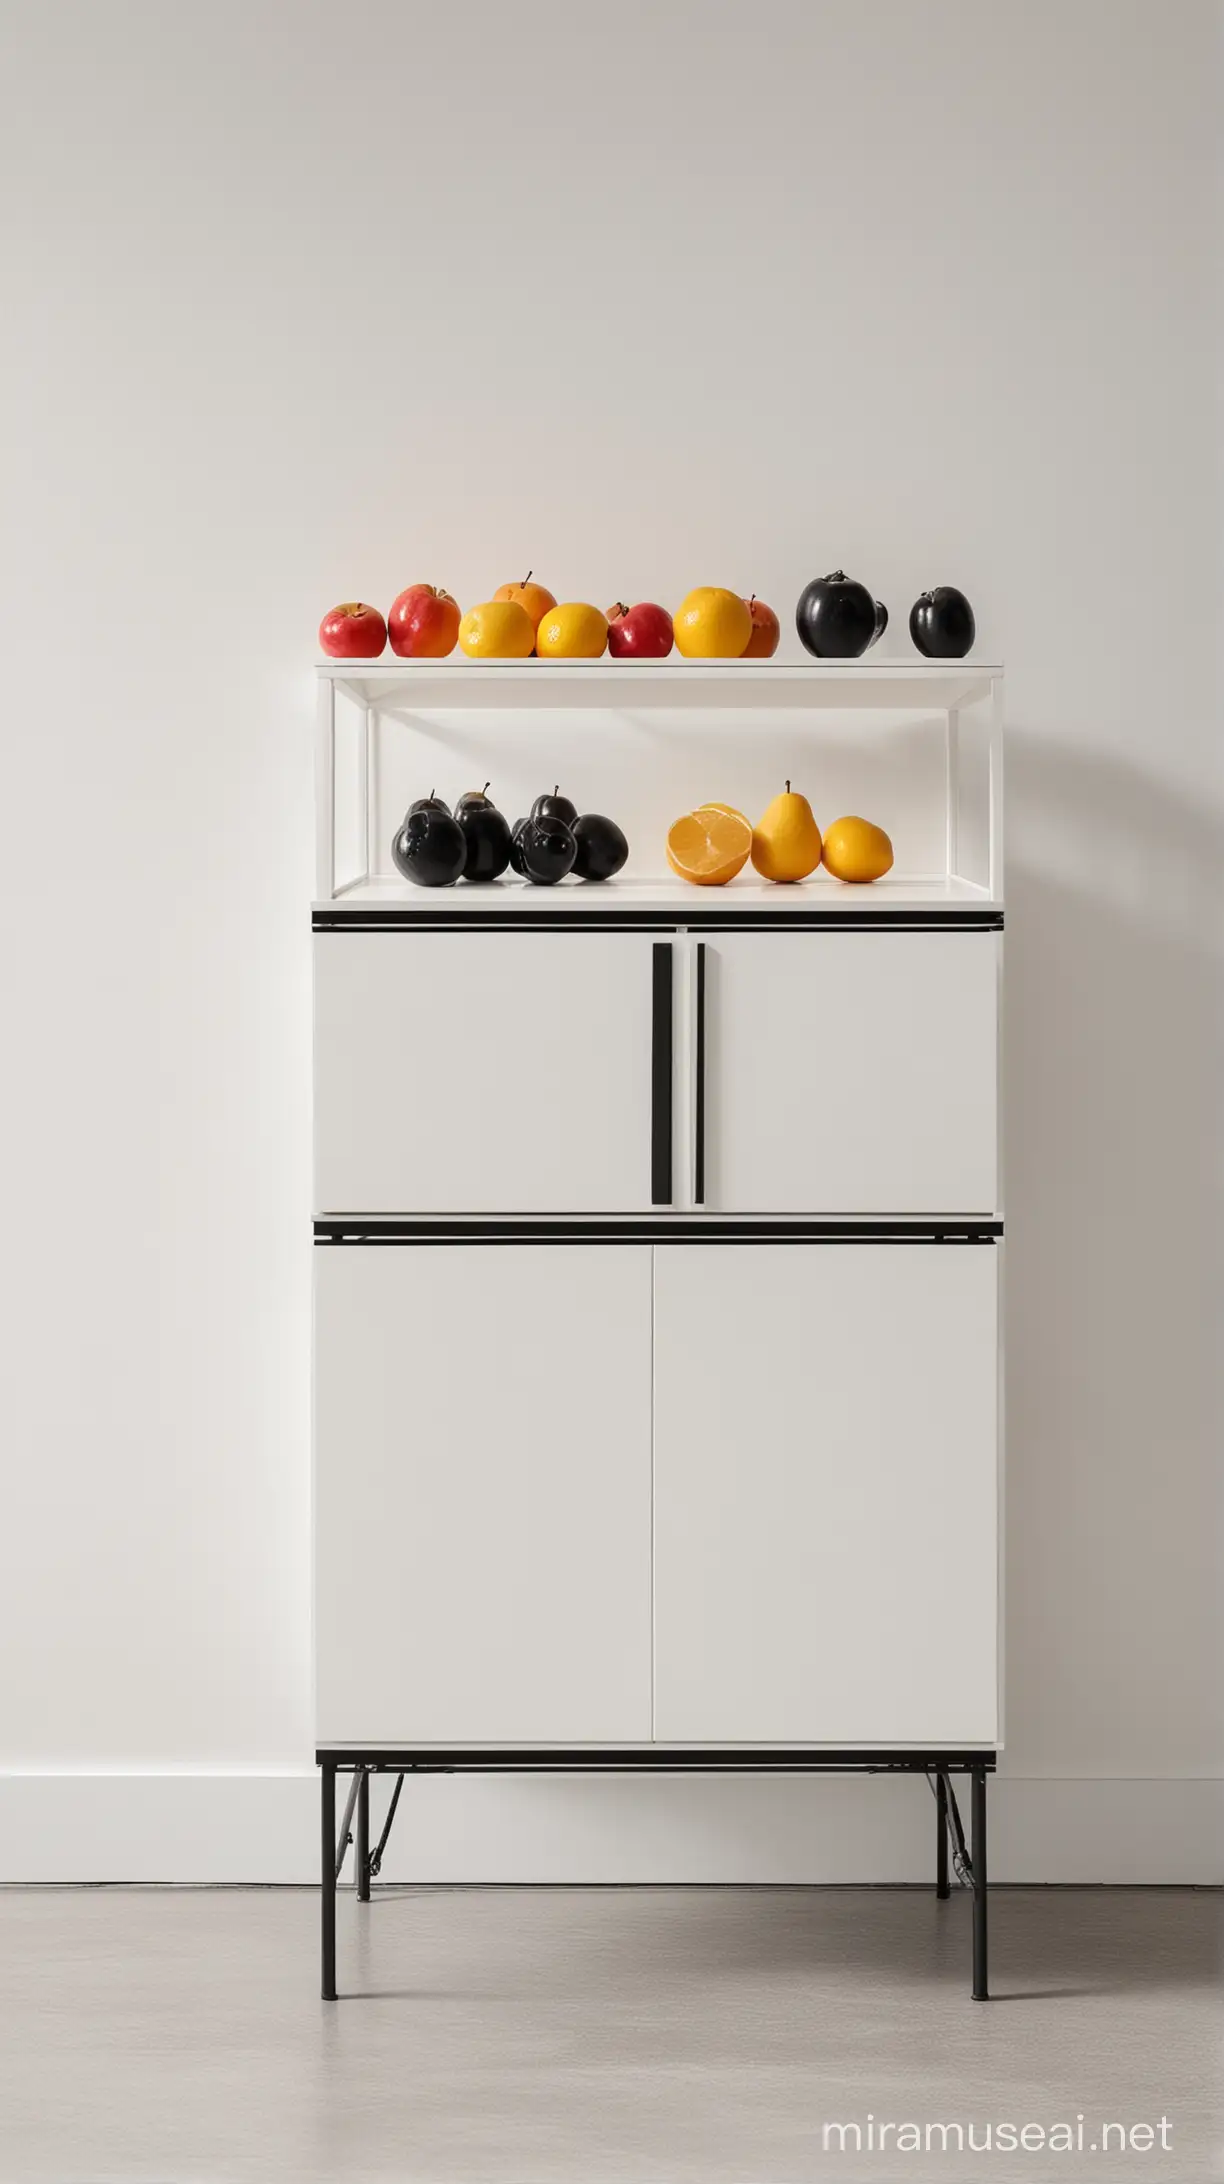 There  a white and black cabinet，There  a shelf and a bowl of fruit on it, minimalist design,  furniture, very minimalist, elegant minimalist, minimalist and beautiful, minimalist, minimalist, minimalist,  design, minimally modern, modern Minimalistic design, Furniture design, cabinet furniture, Modern and , Modern and , Minimalistic design, Such a design, modern gallery furniture 